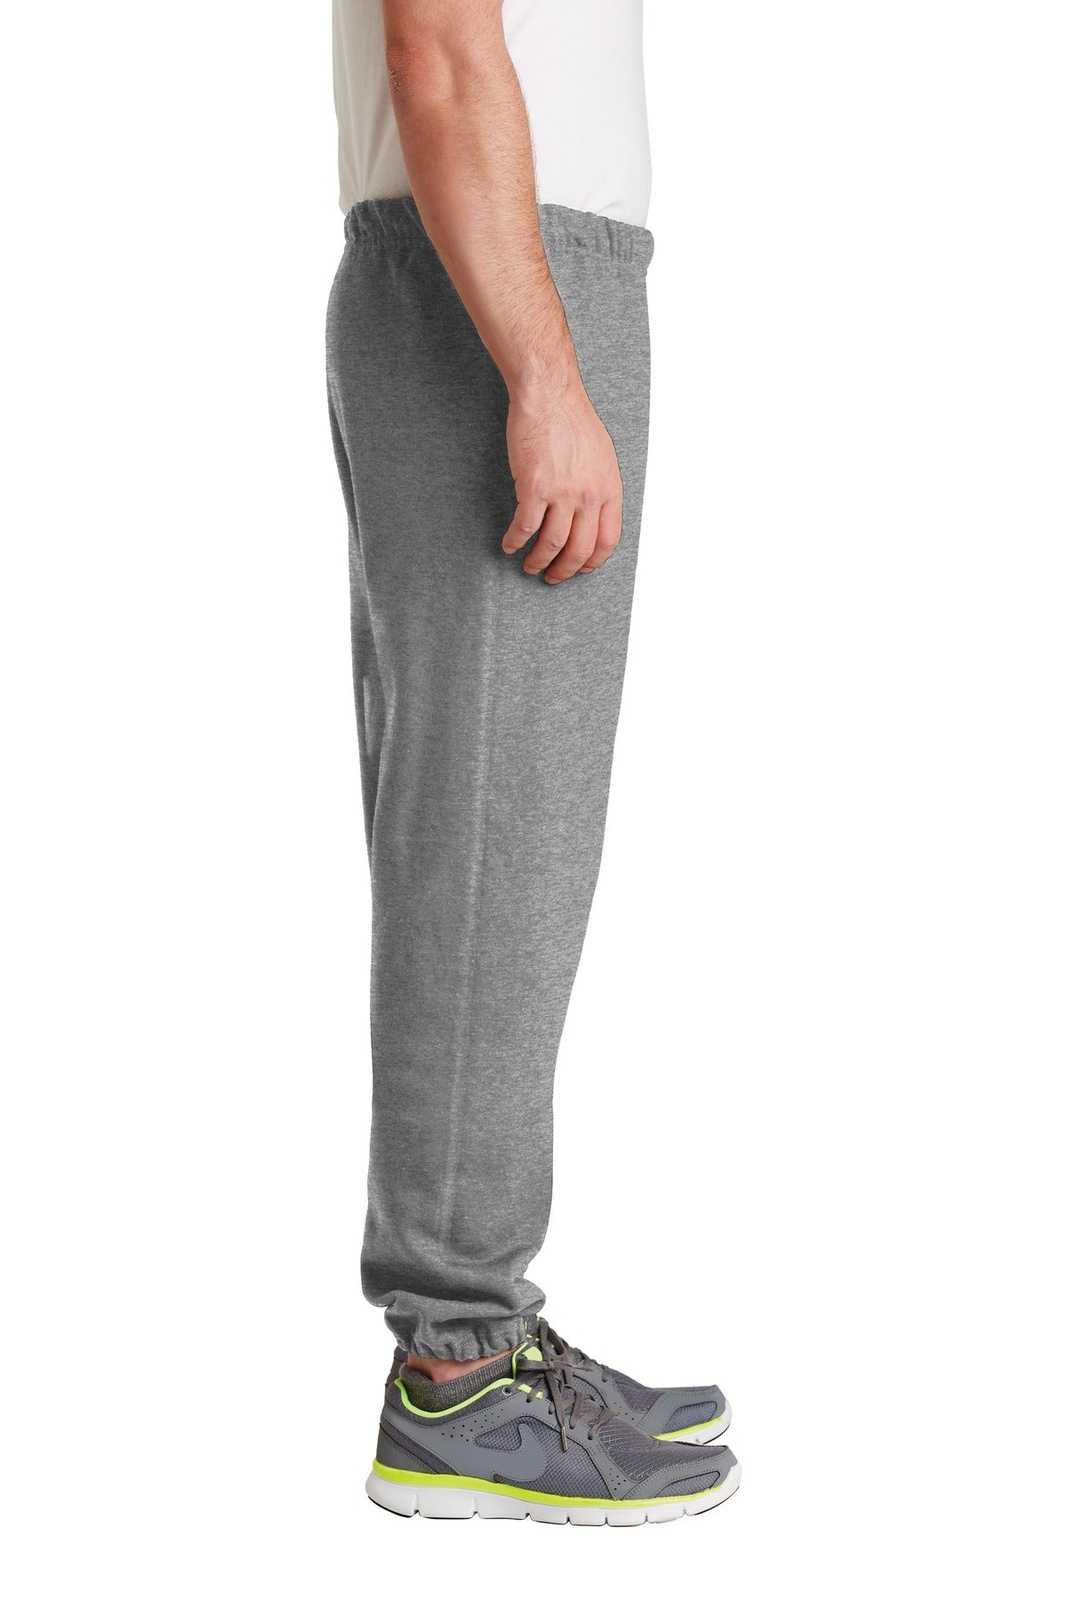 Jerzees 4850MP Super Sweats Nublend Sweatpant with Pockets - Oxford - HIT a Double